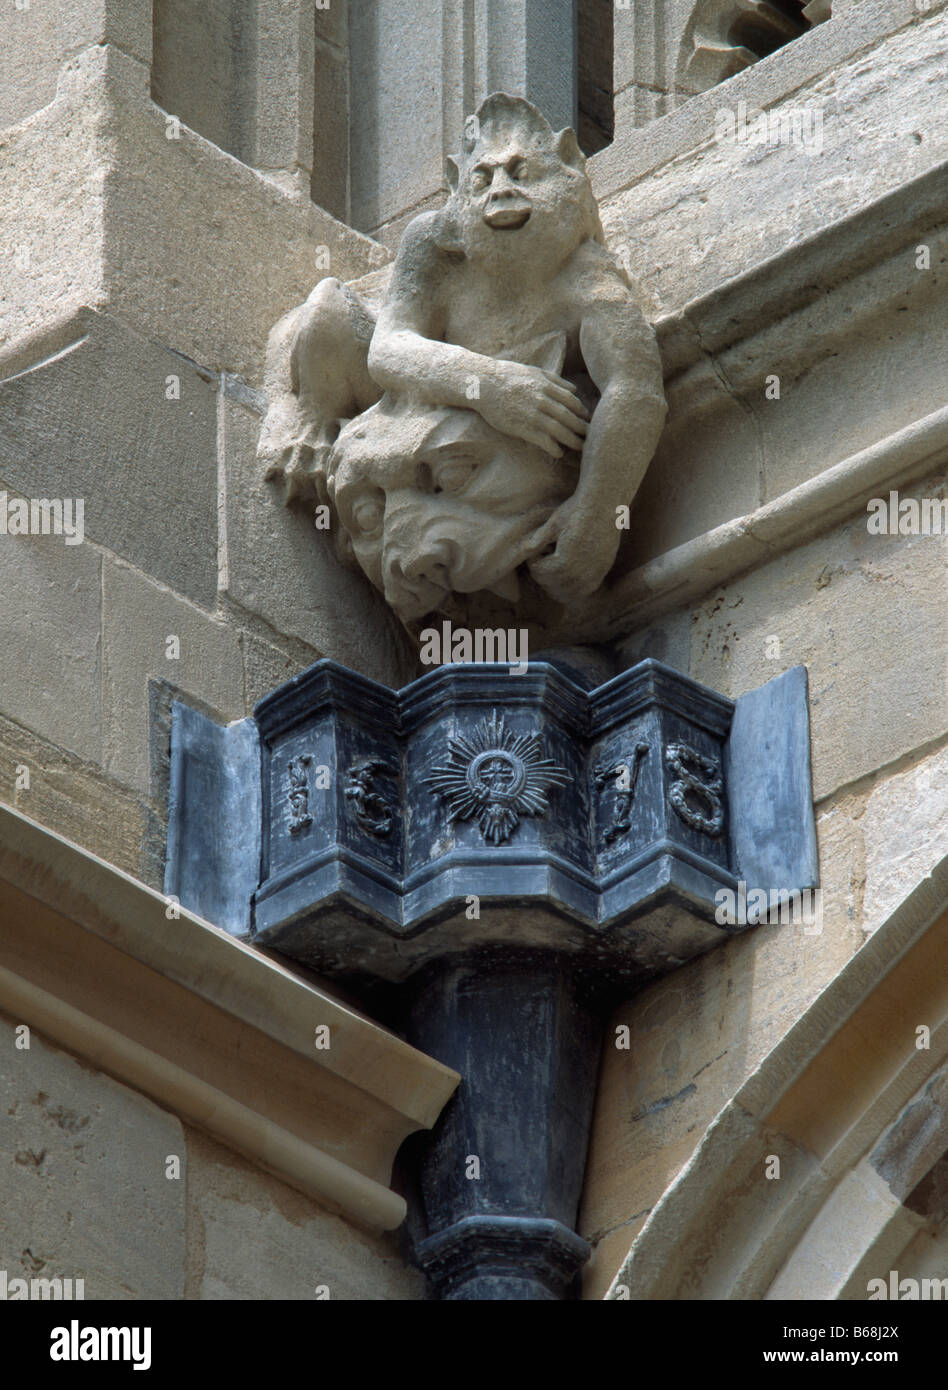 Gargouille grotesque, St George'S Windsor Banque D'Images